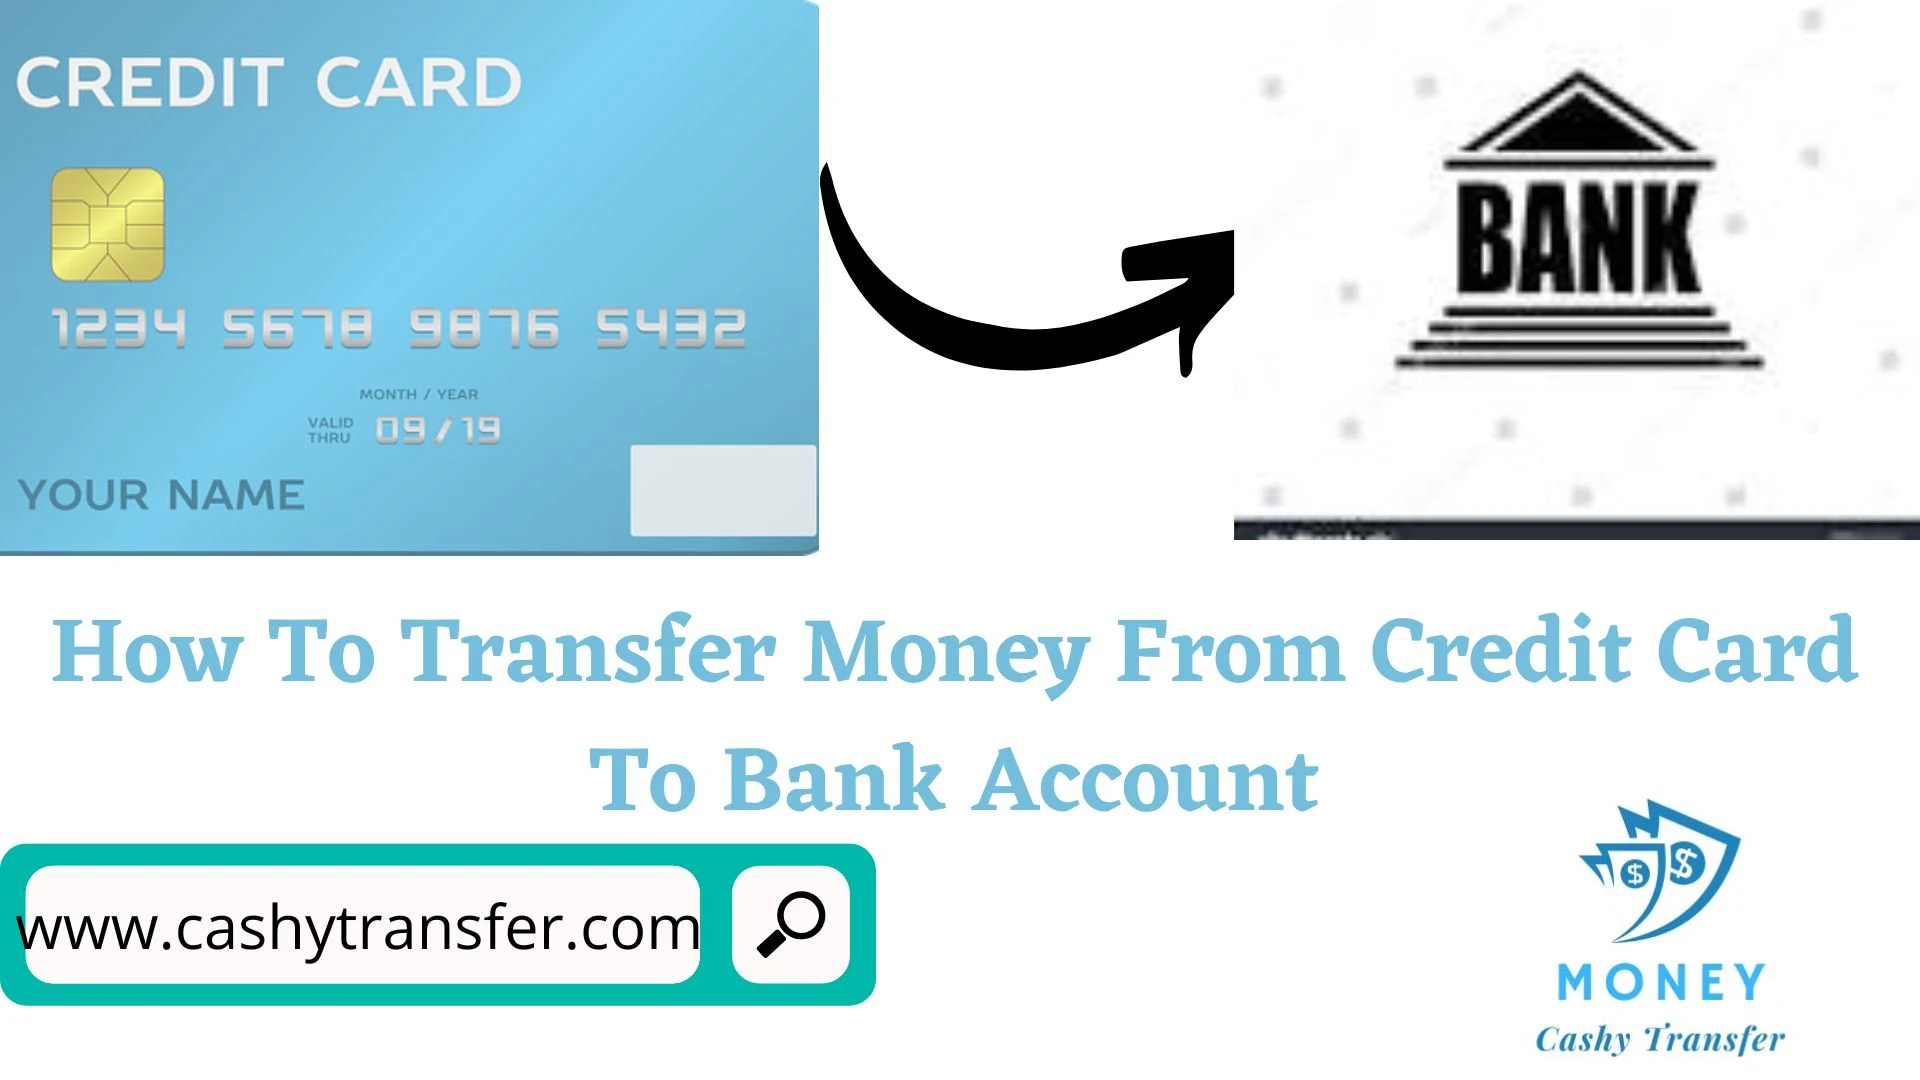 Transfer Money From Credit Card To Bank Account